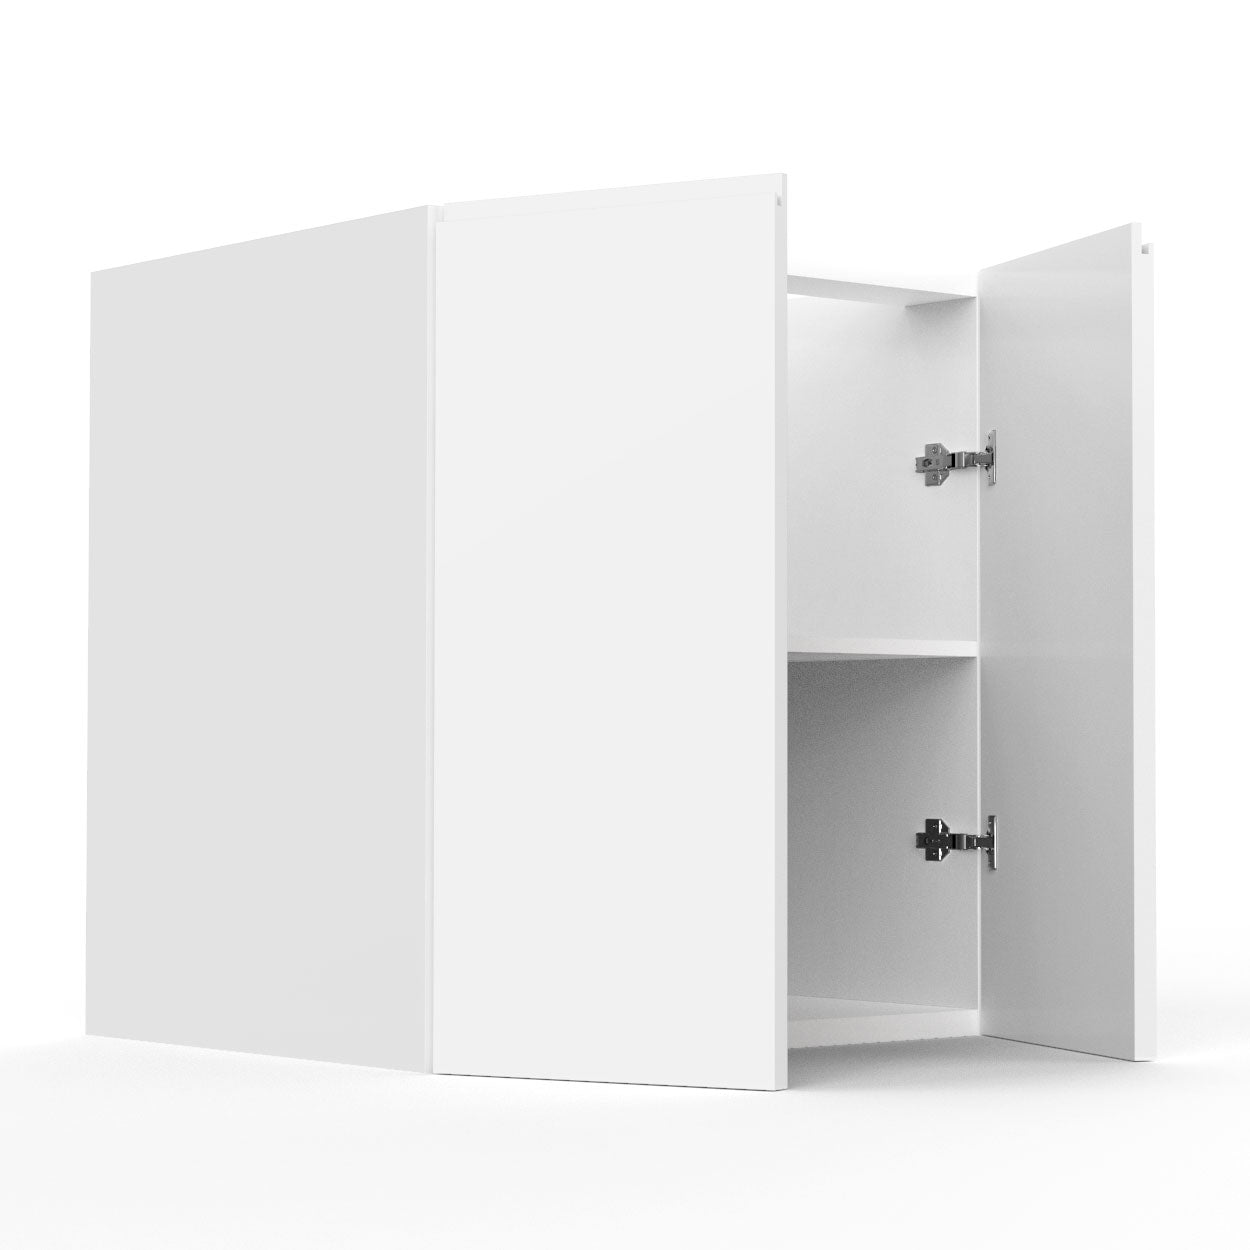 Base Cabinet - RTA - Lacquer White - Full Height Kitchen Cabinet - Double Door | 27